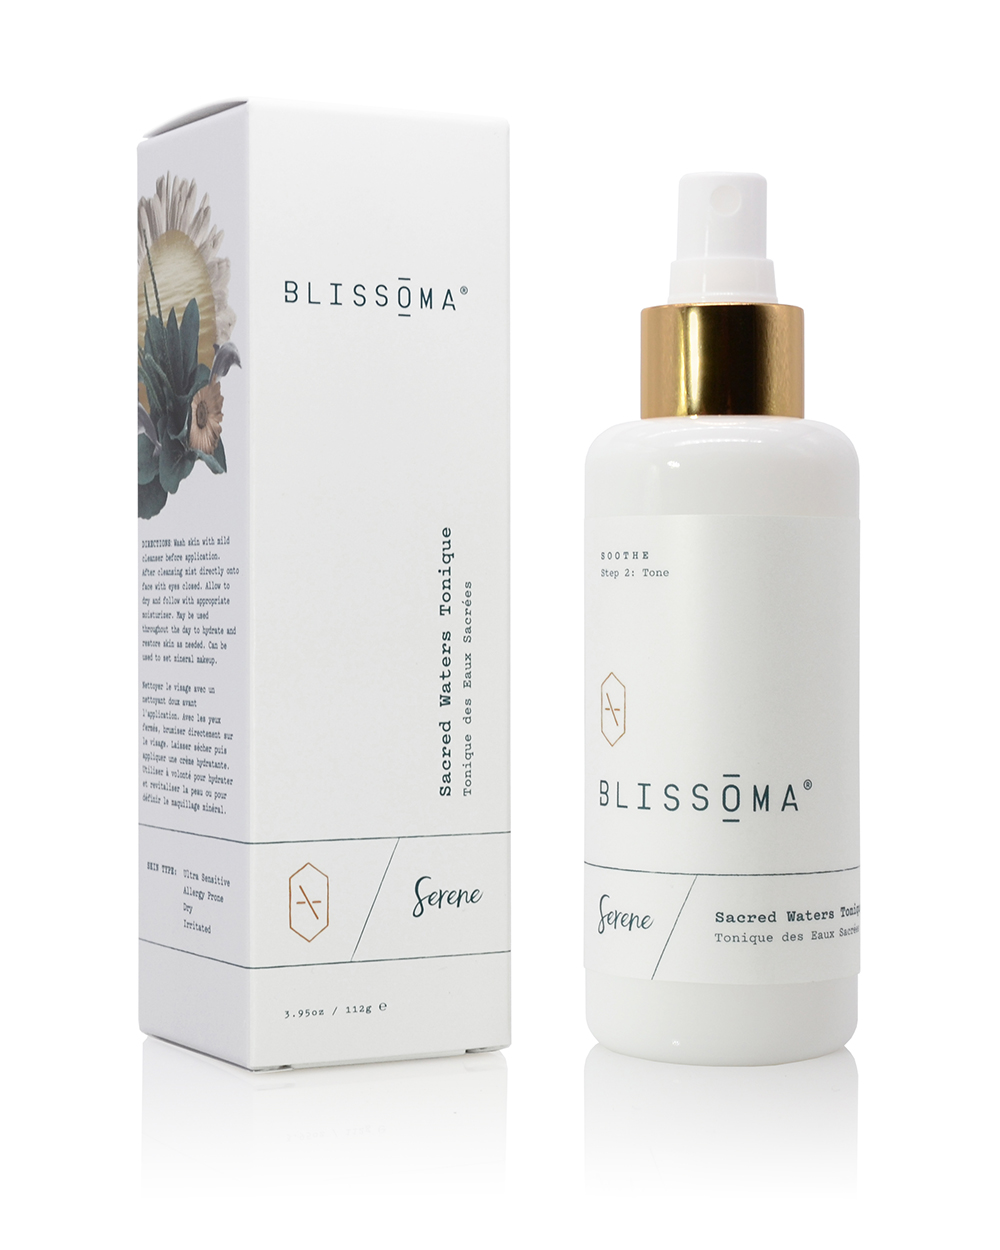 Fungal acne safe facial toner by Blissoma to use for a 10 minute glowy summer natural makeup look